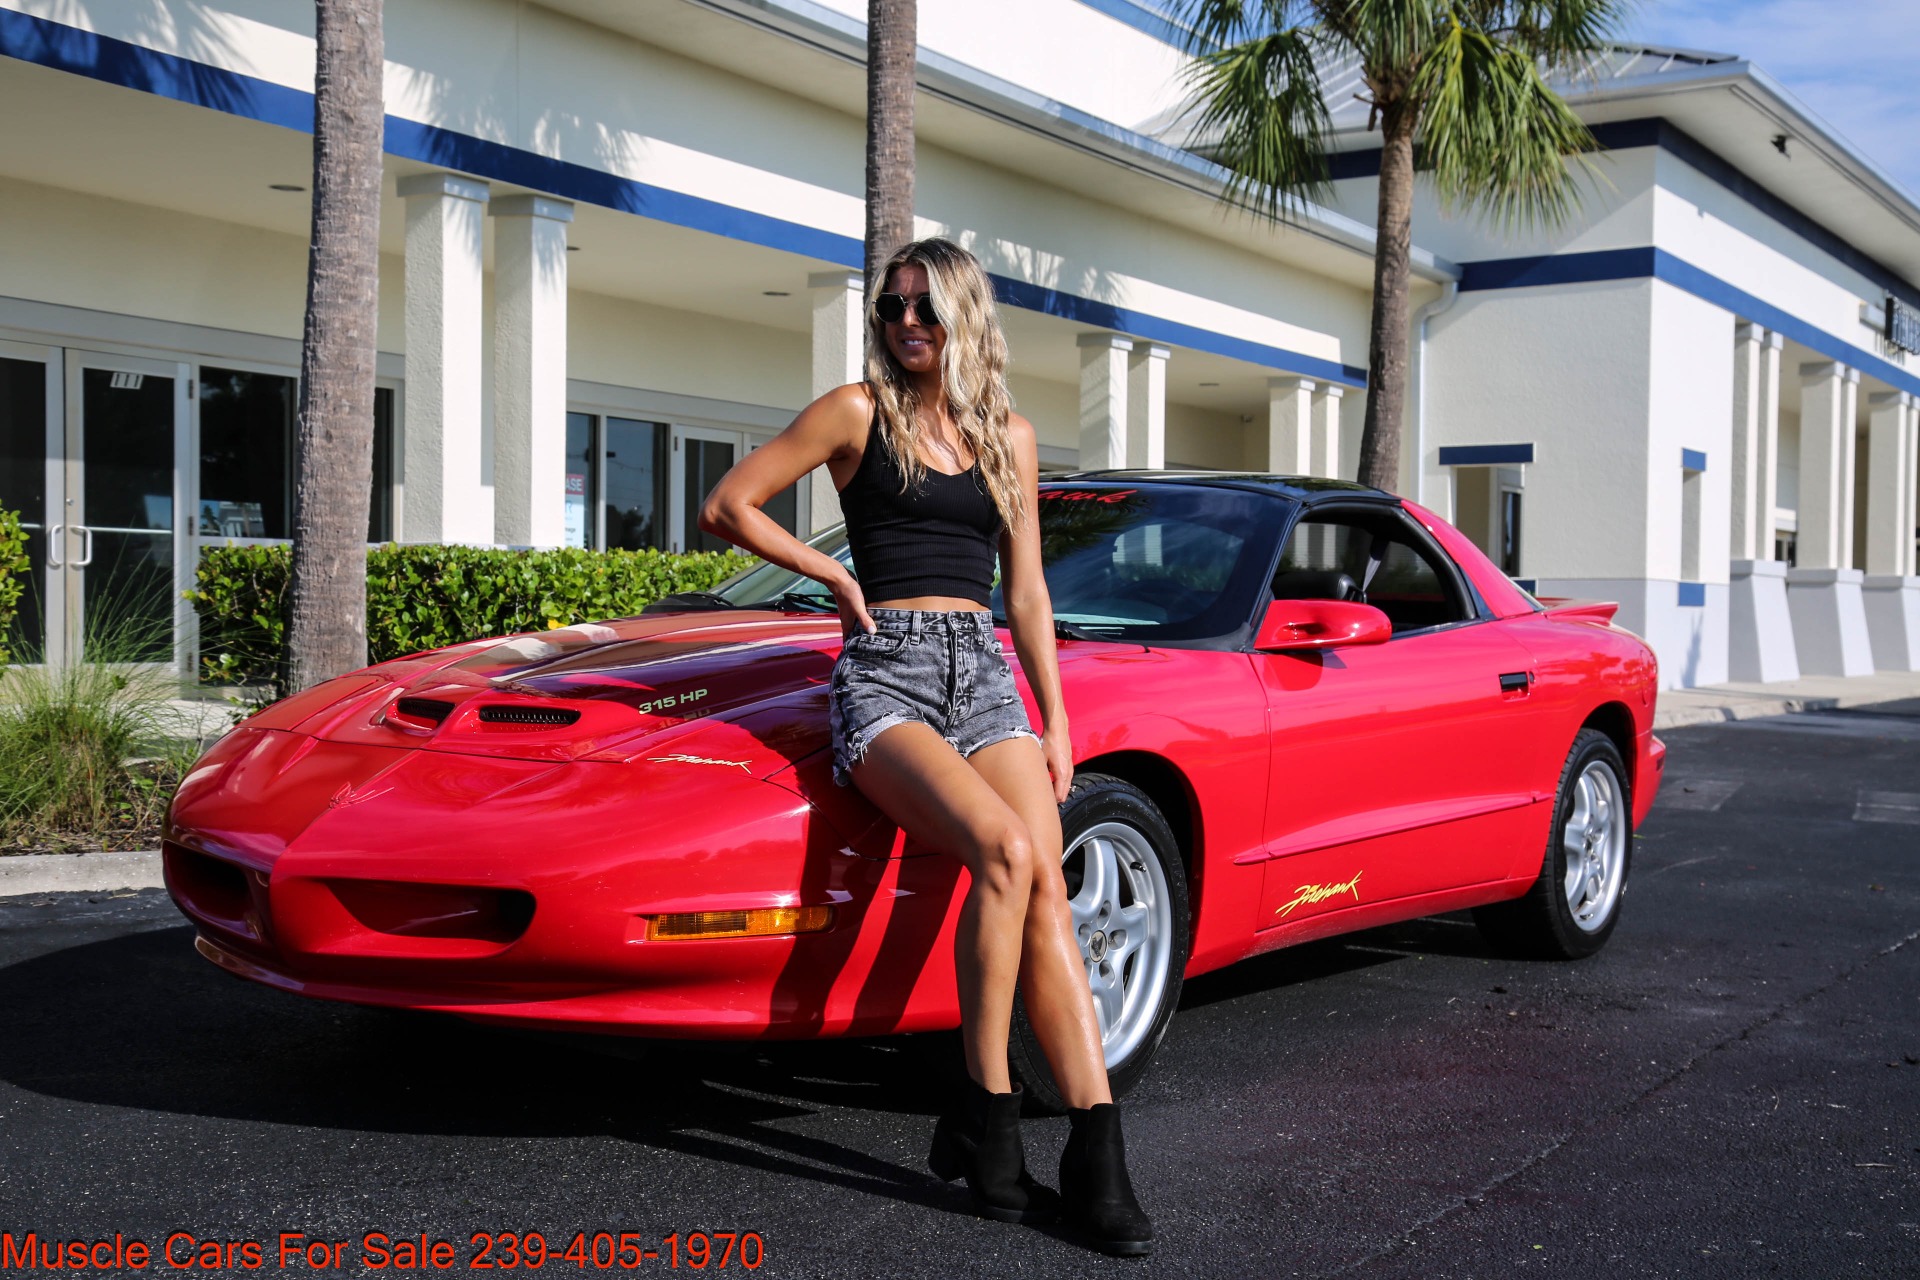 Used 1995 Pontiac Firebird FireHawk Fire Hawk for sale $21,000 at Muscle Cars for Sale Inc. in Fort Myers FL 33912 2